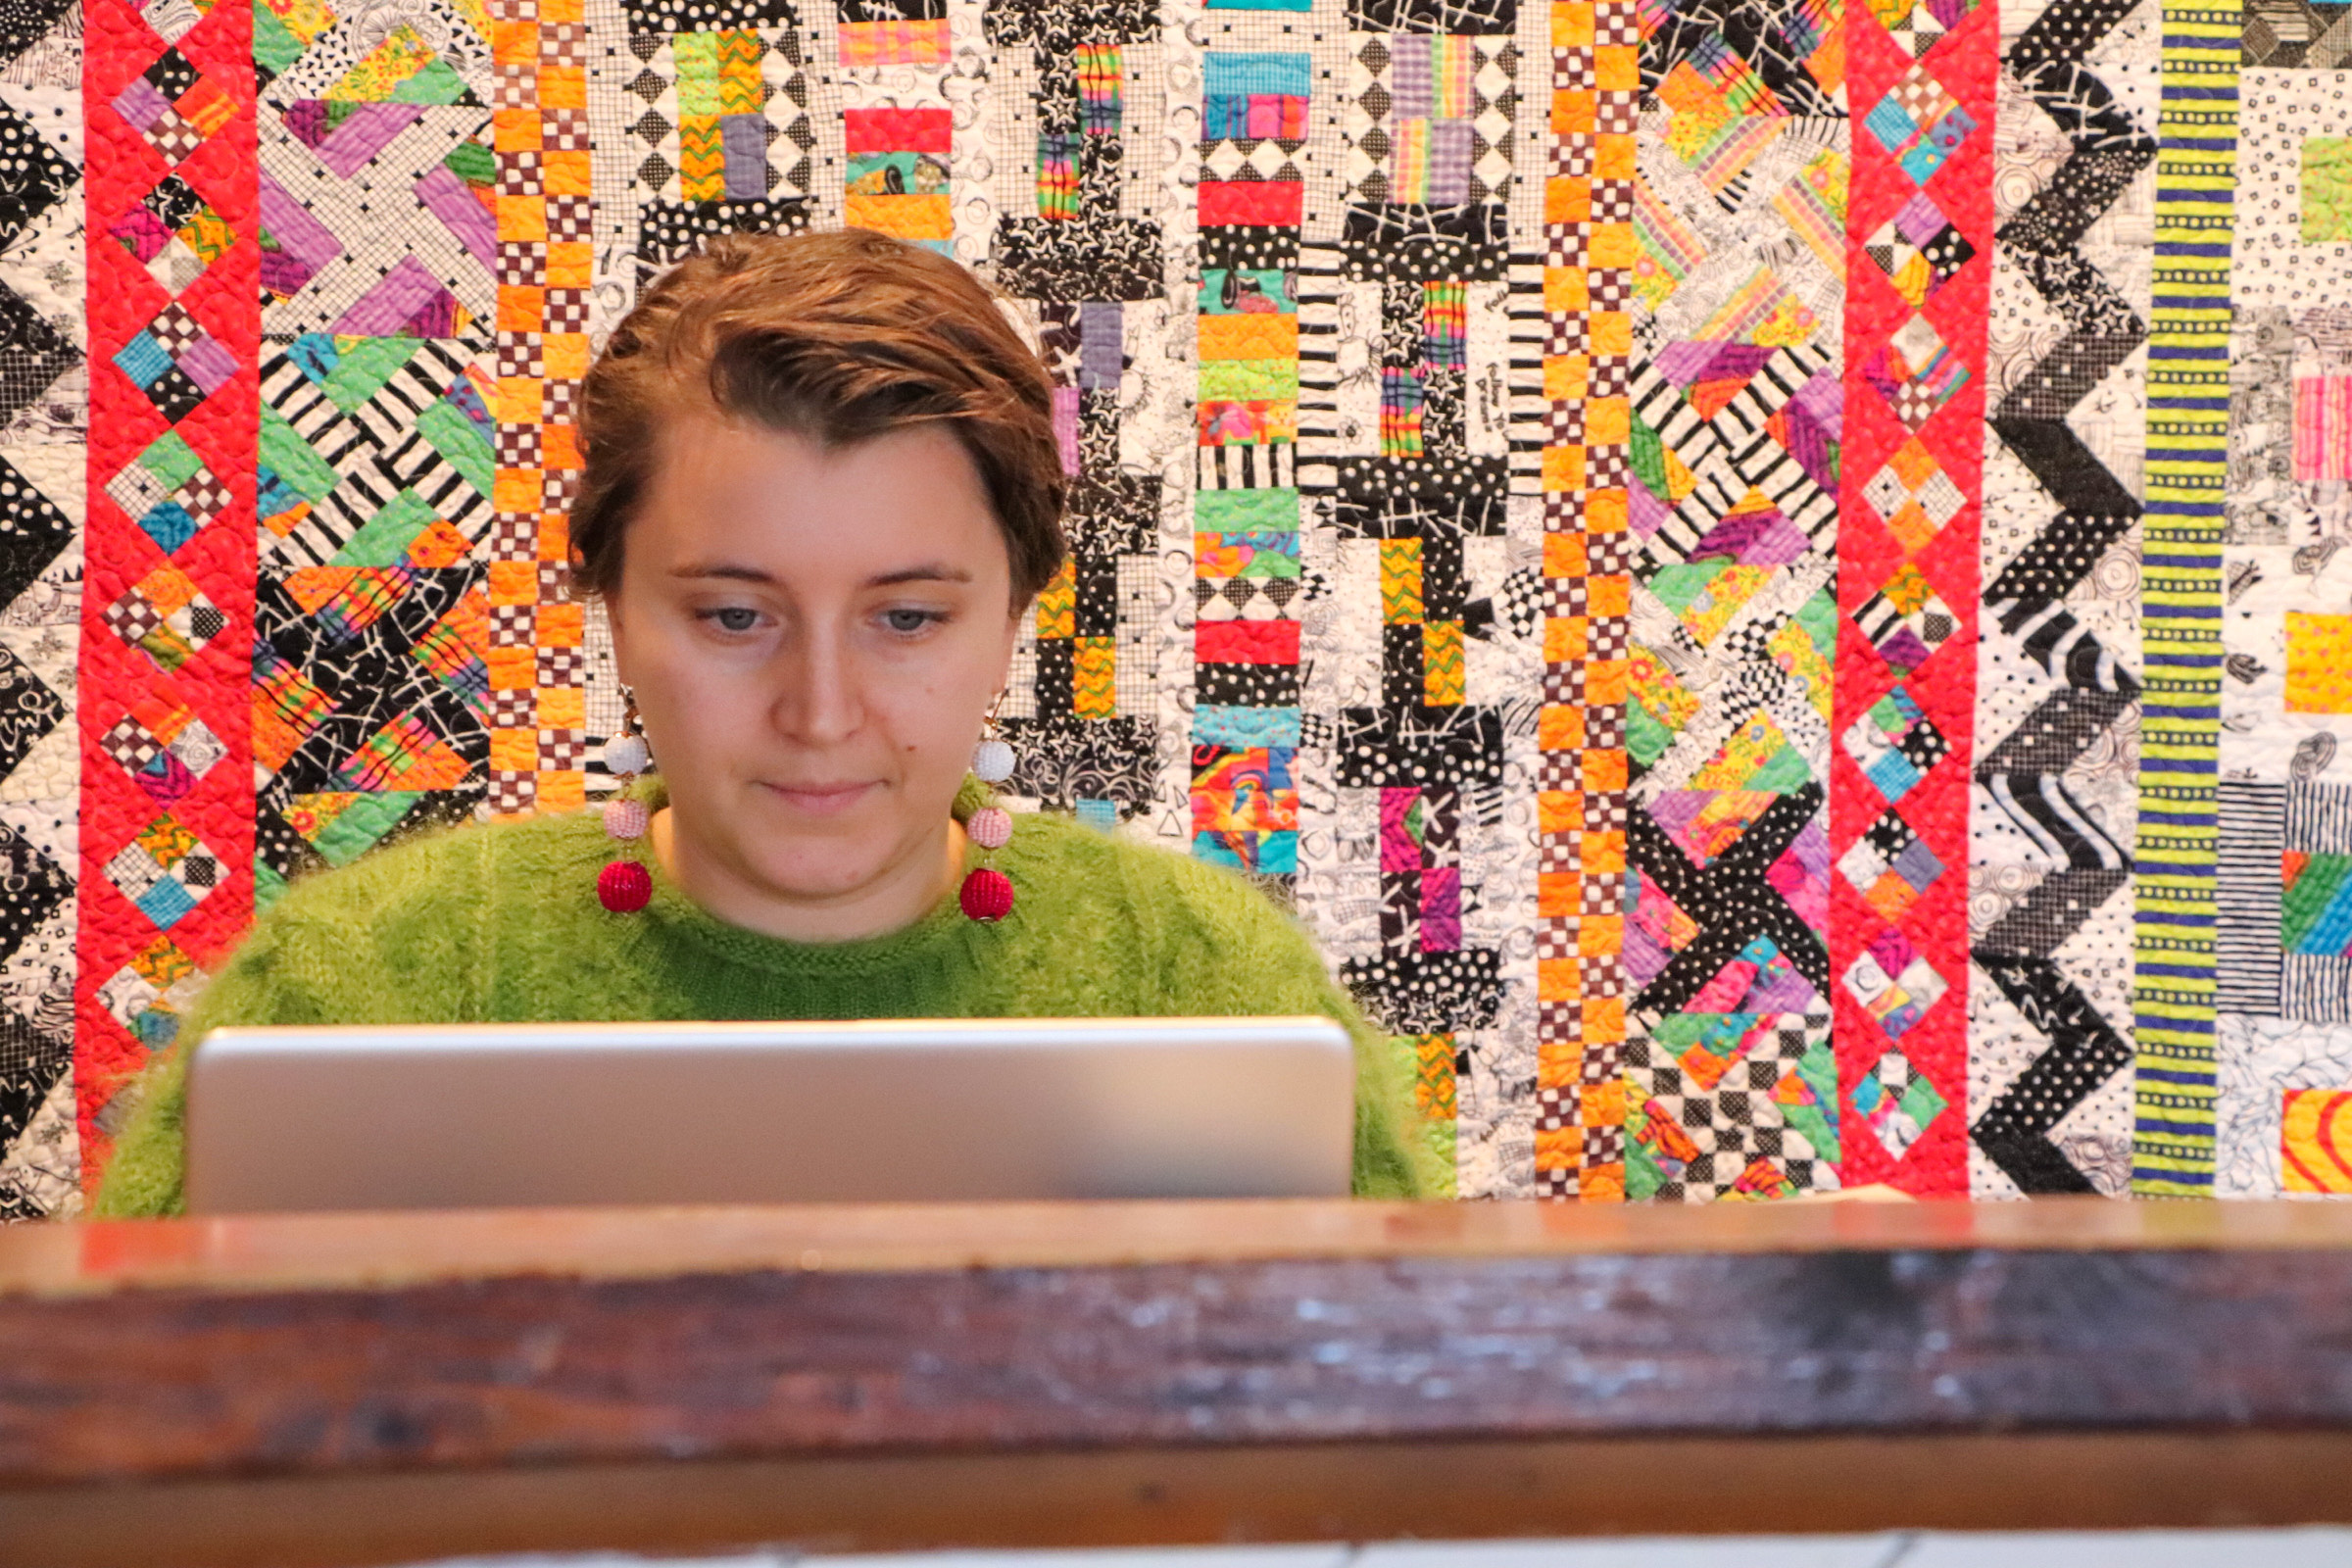 Woman working on computer with patterned quilt behind her